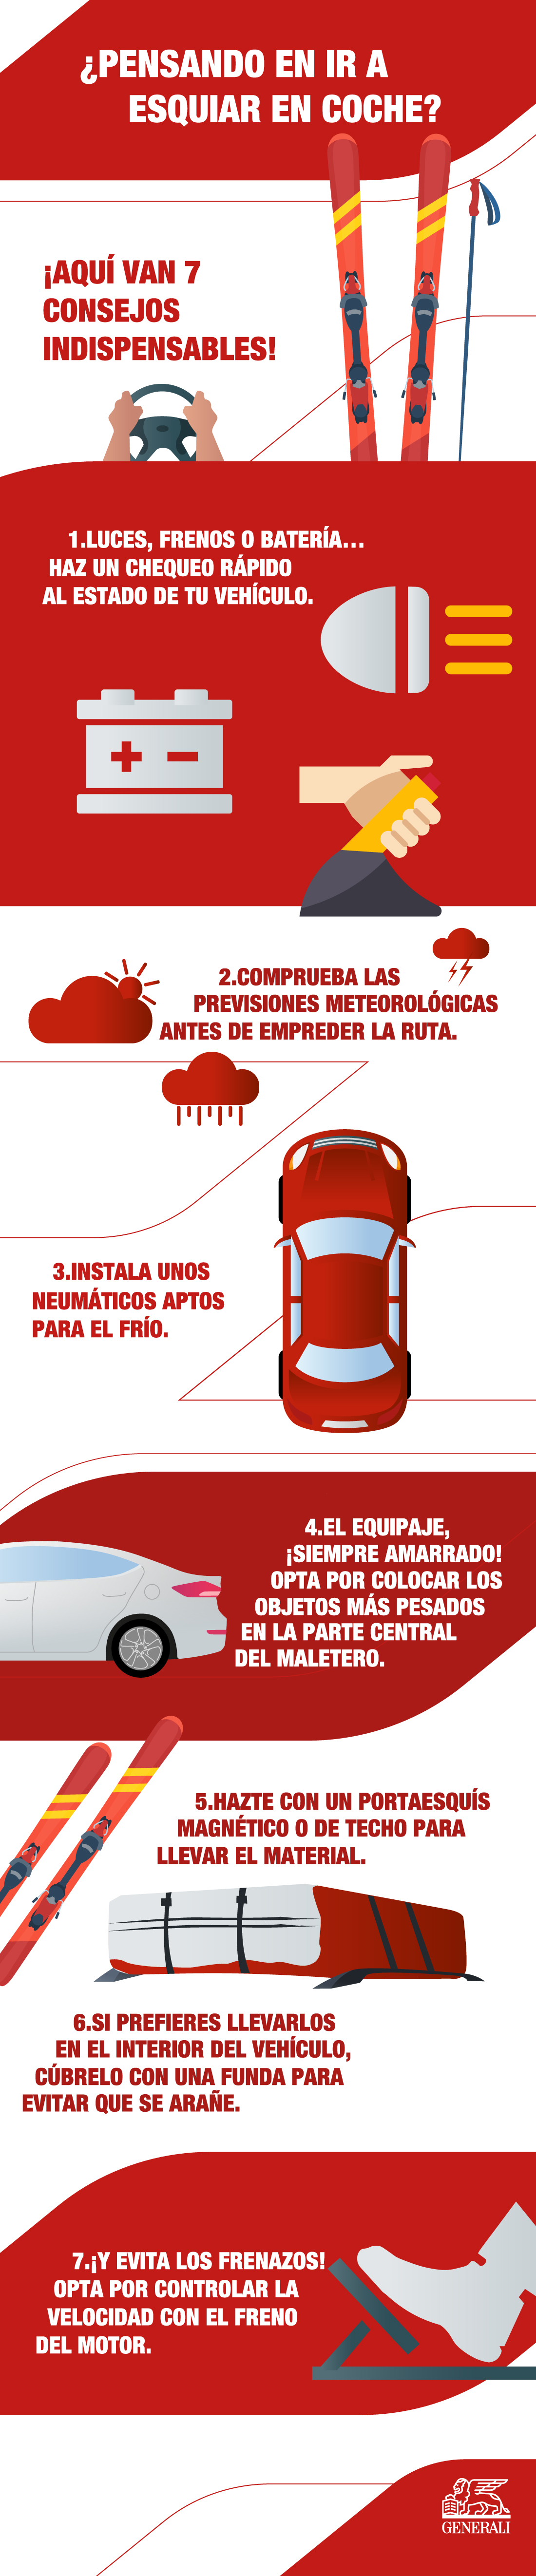 1573435_Generali-Spain-Going-on-skiing-in-your-own-car-infographic_022223.jpg